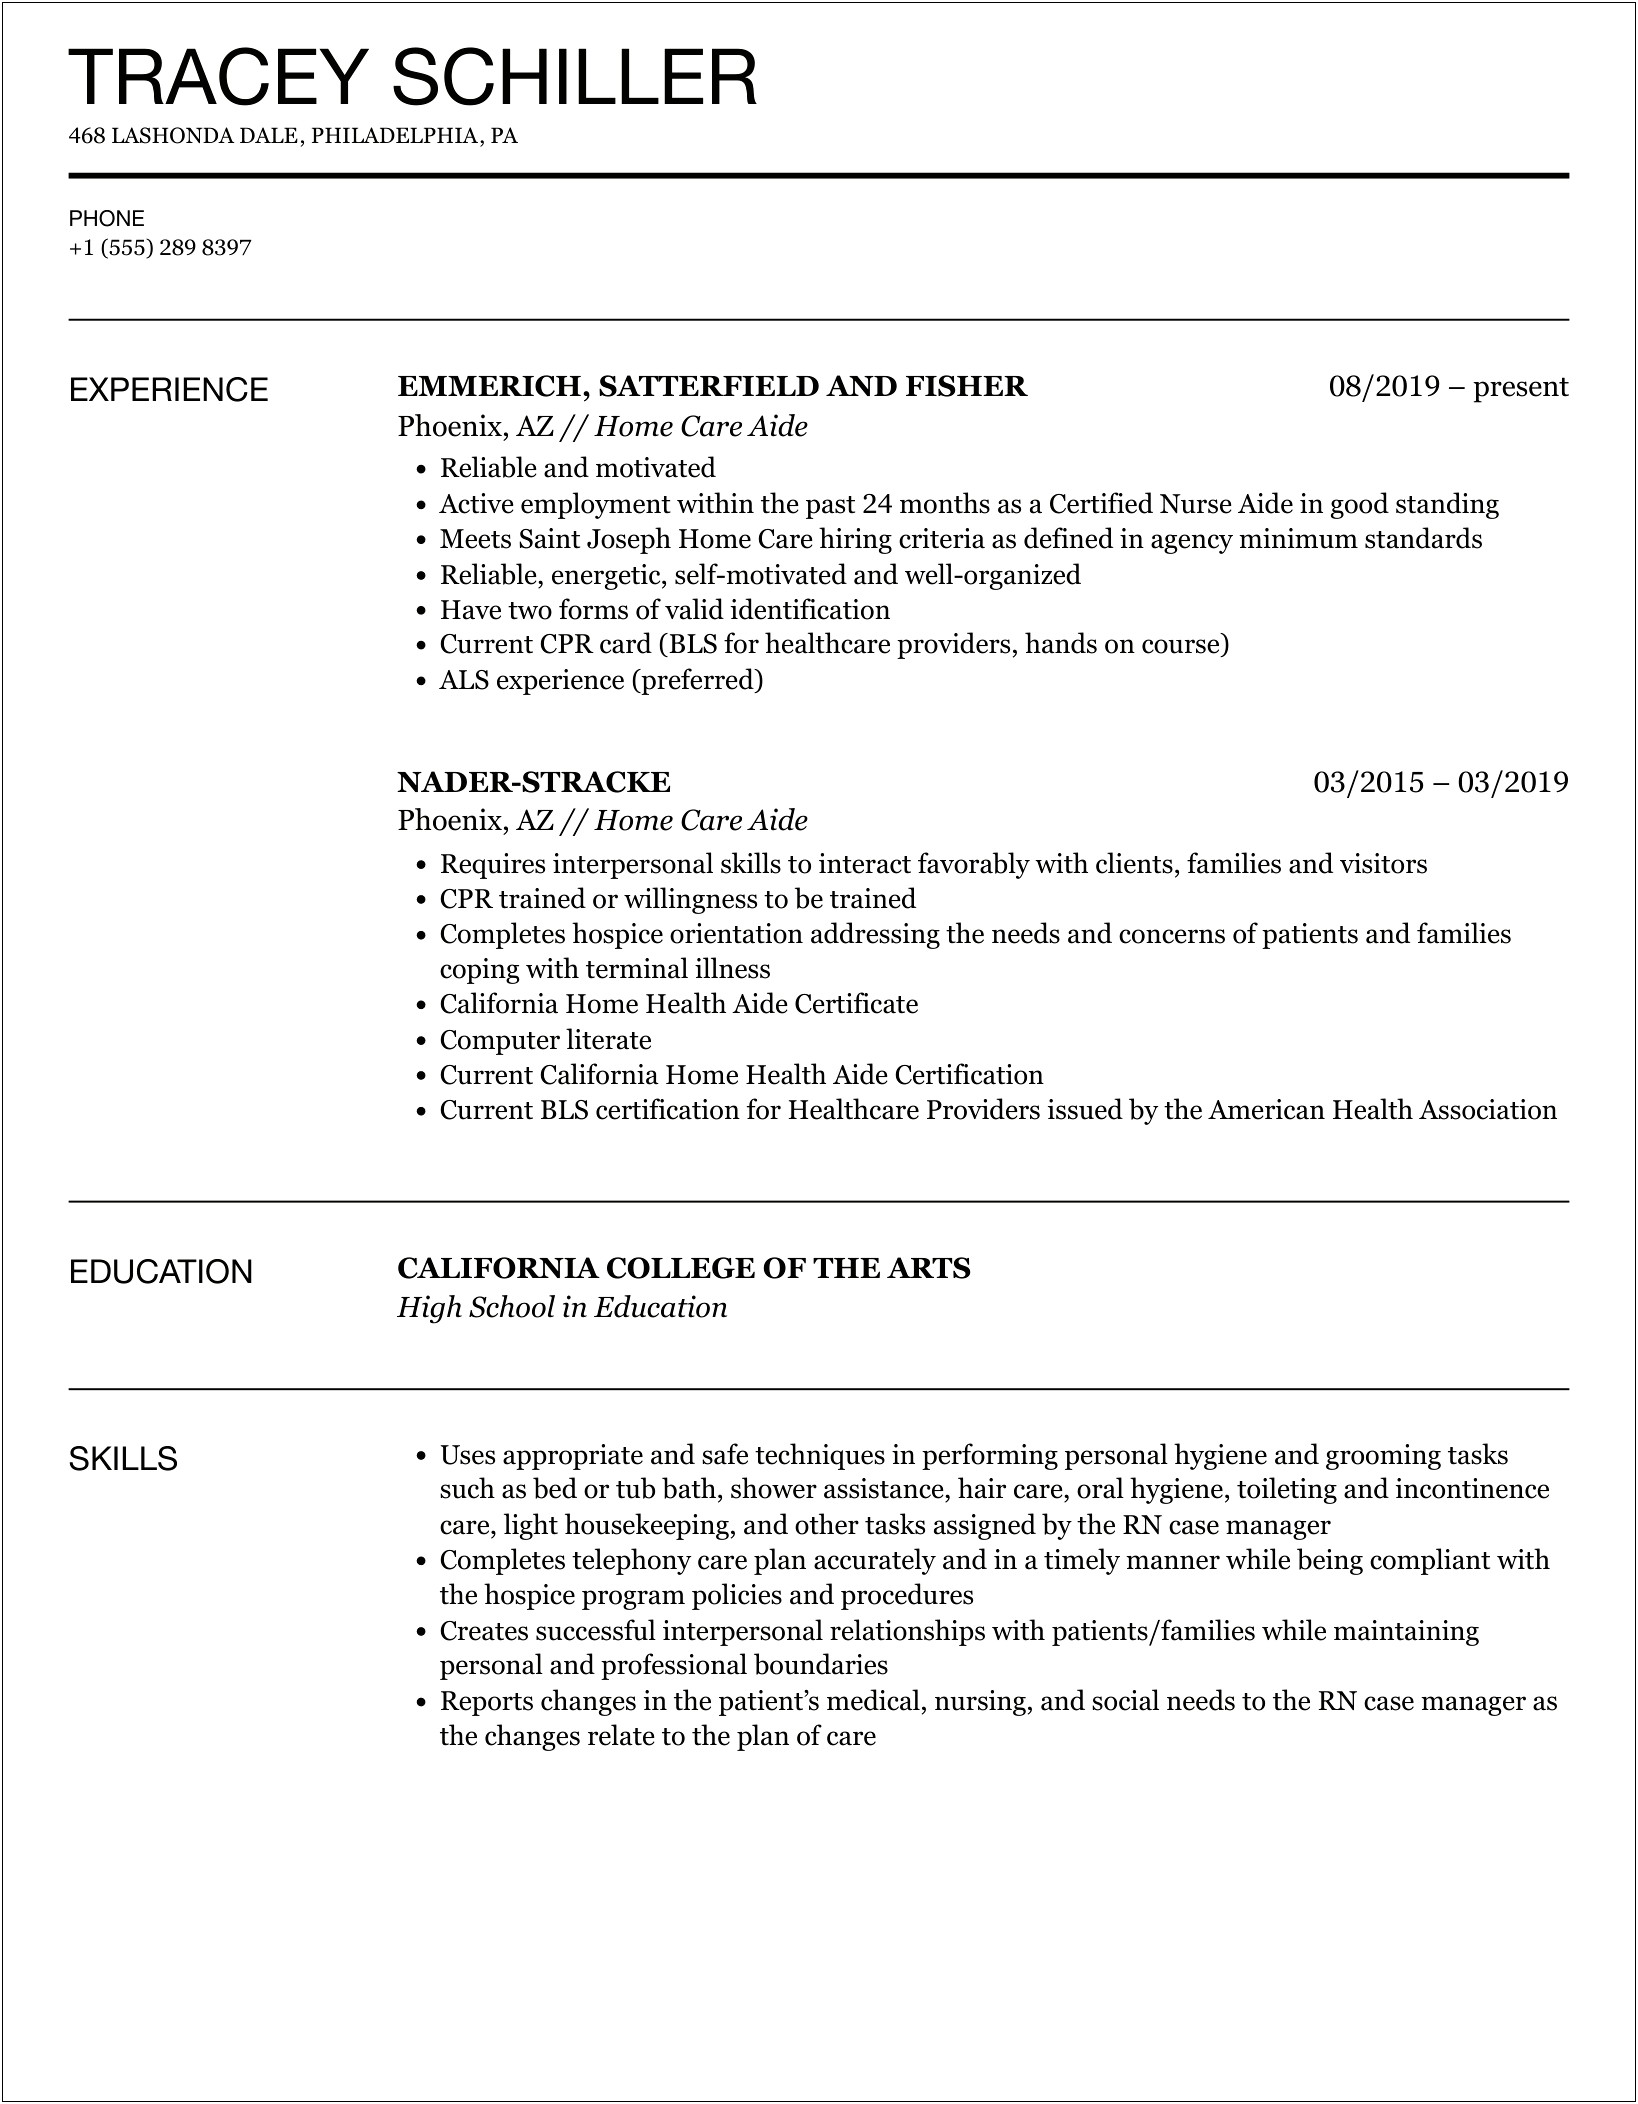 Resume Samples For Home Care Aide